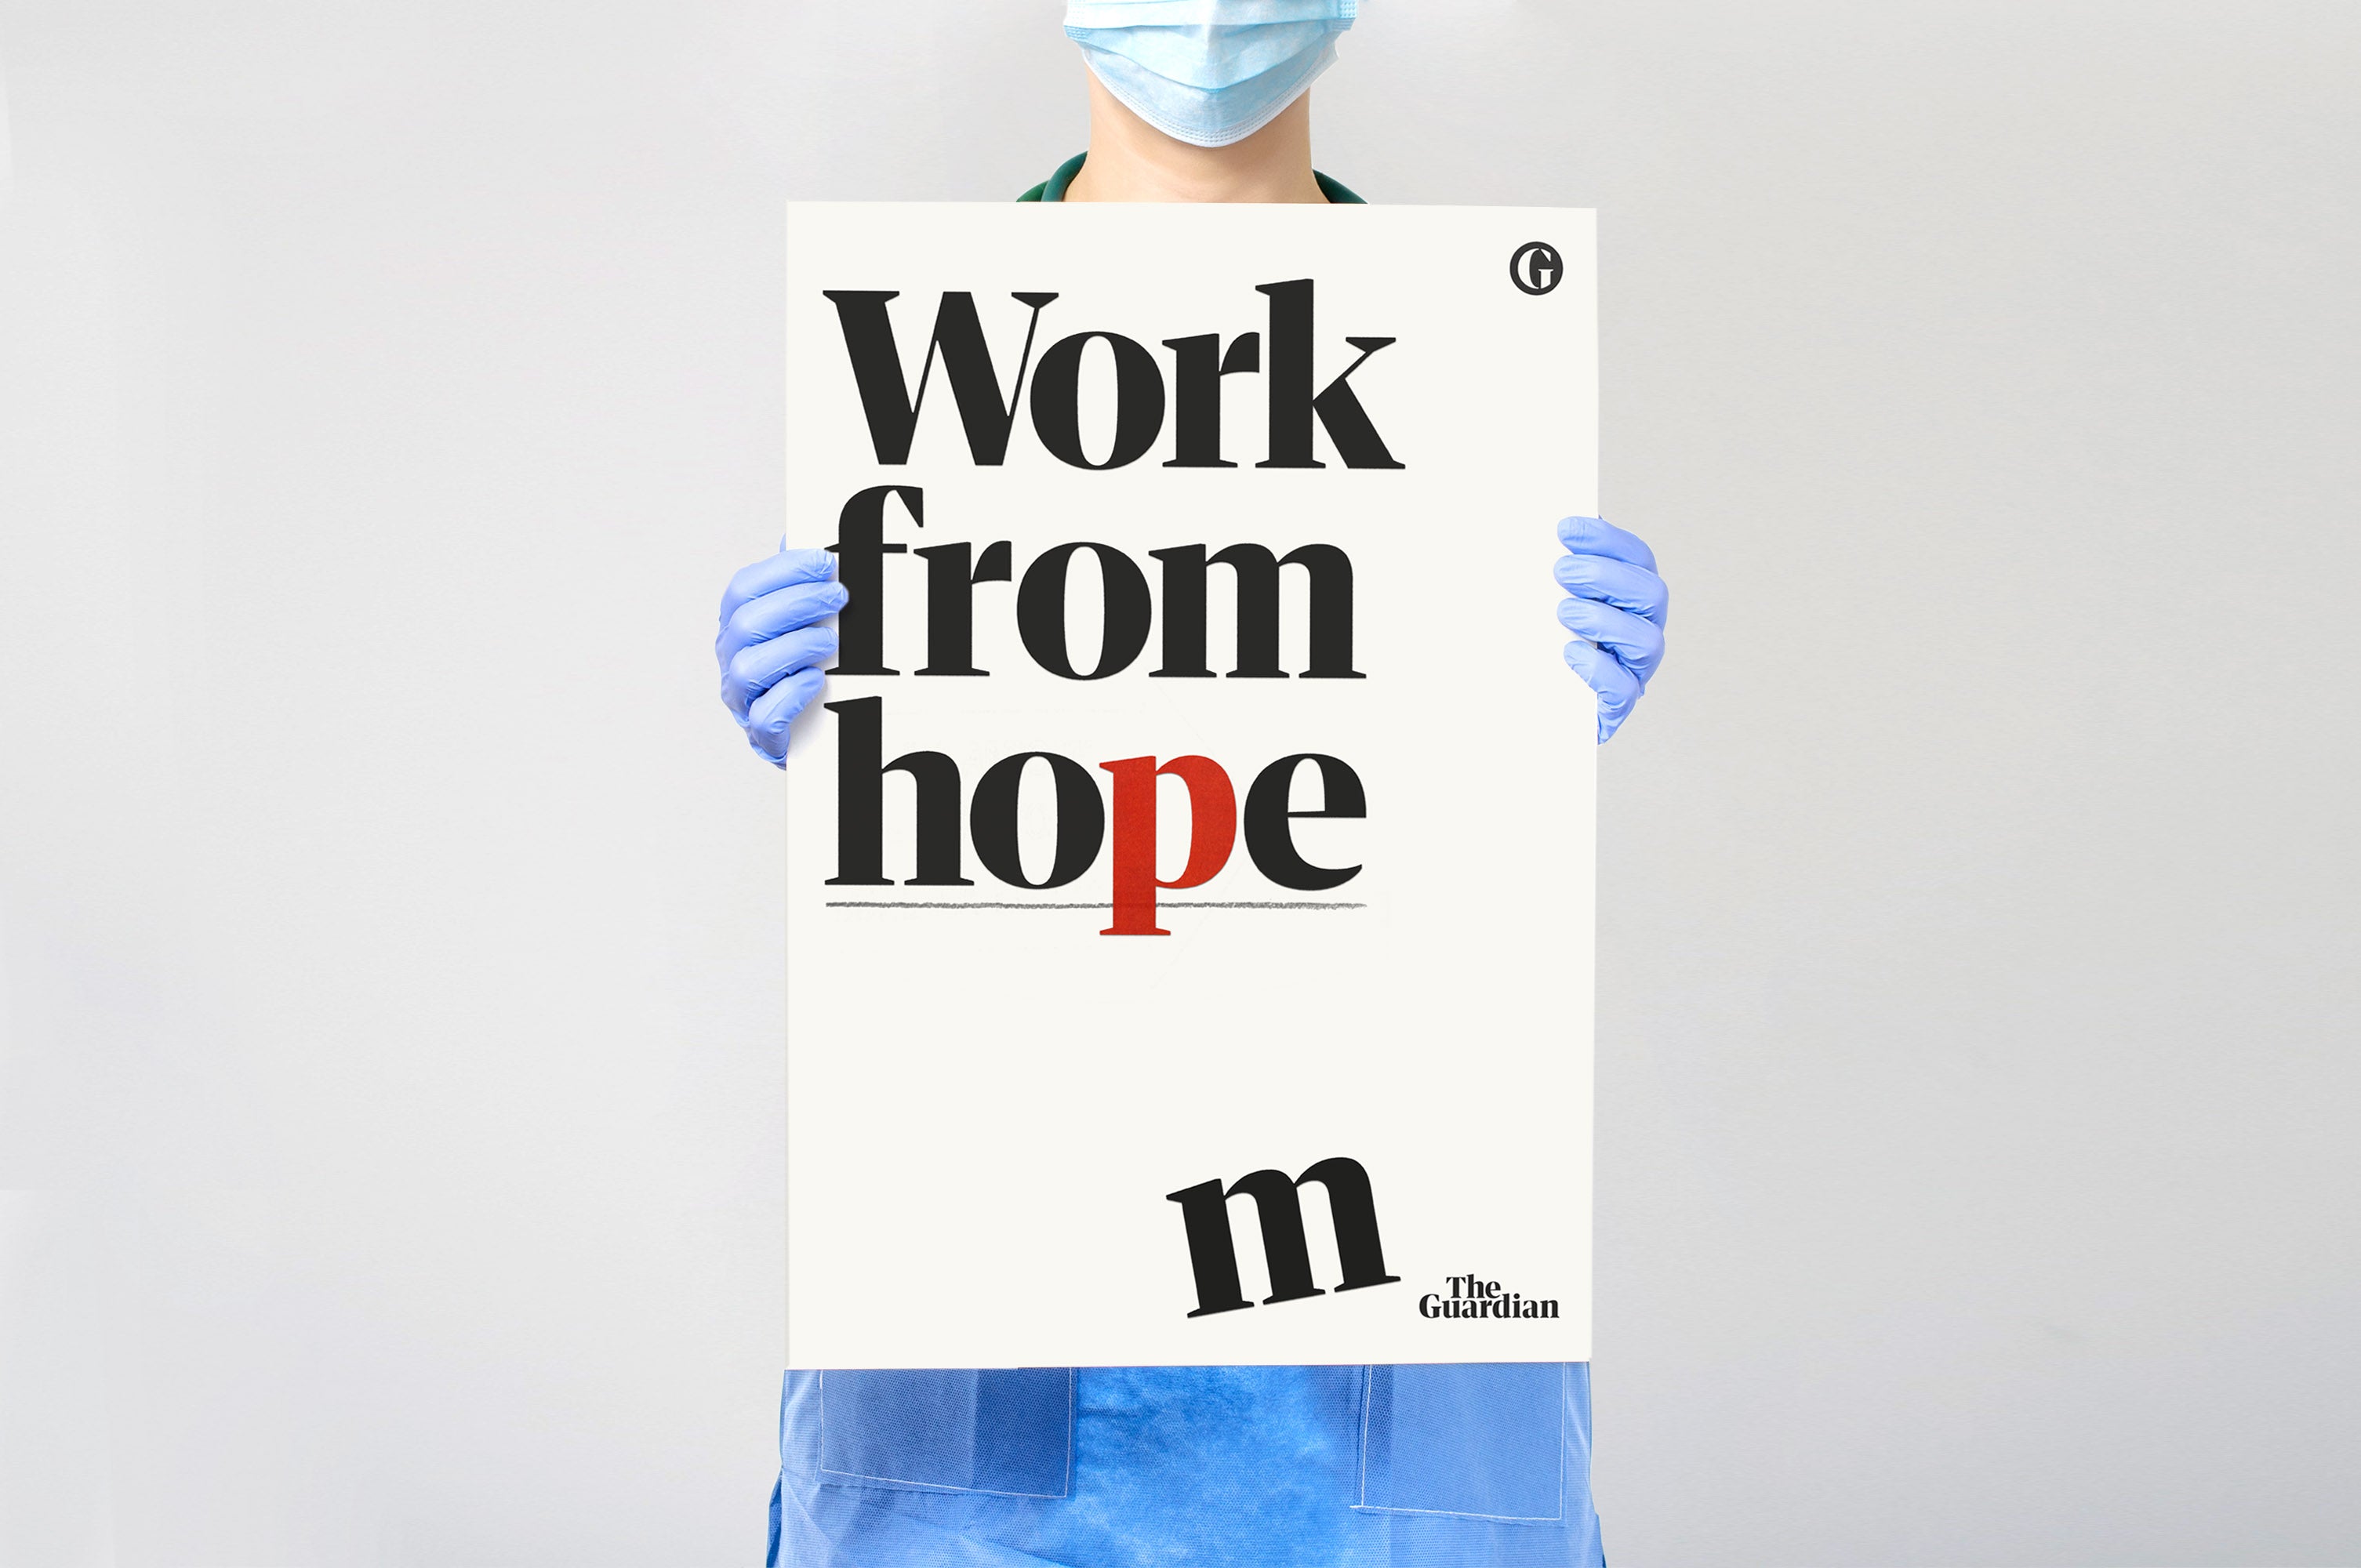 Work from hope